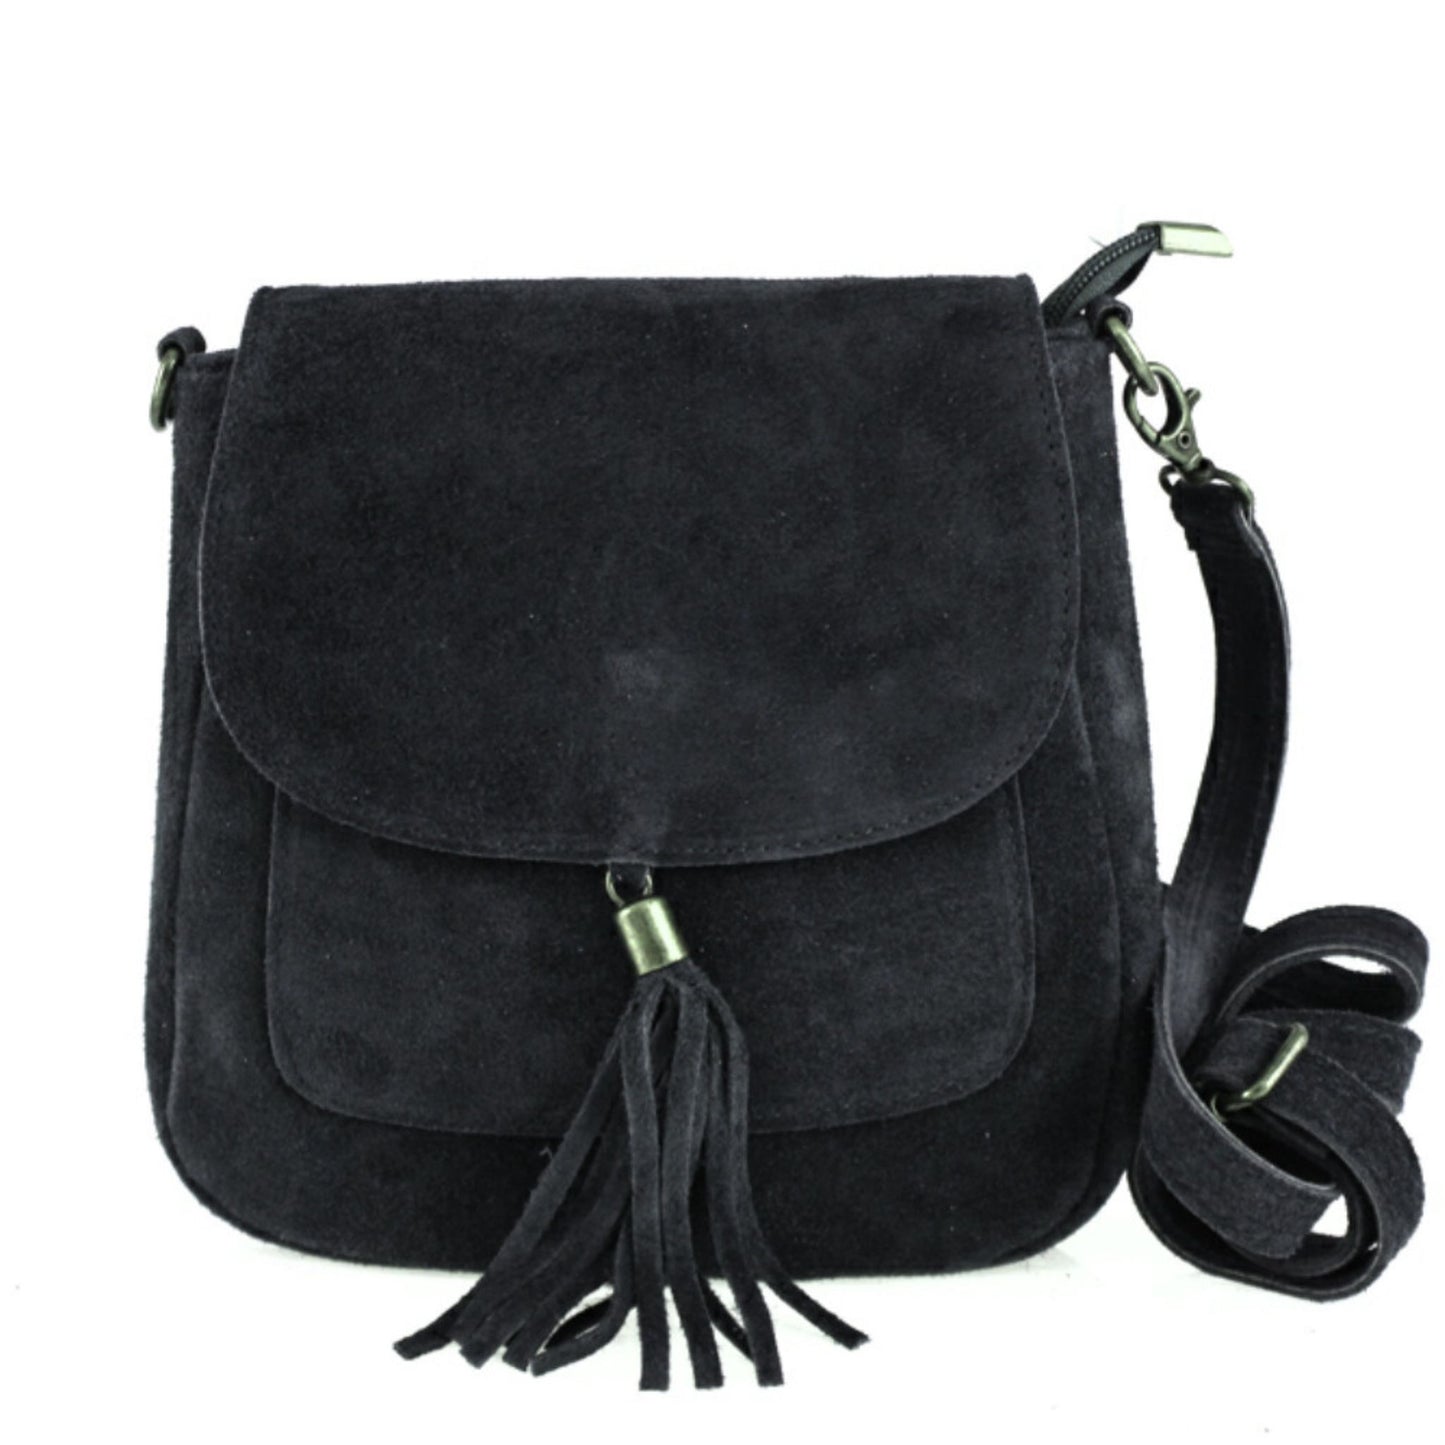 The Suede Cross Body Saddle Bag